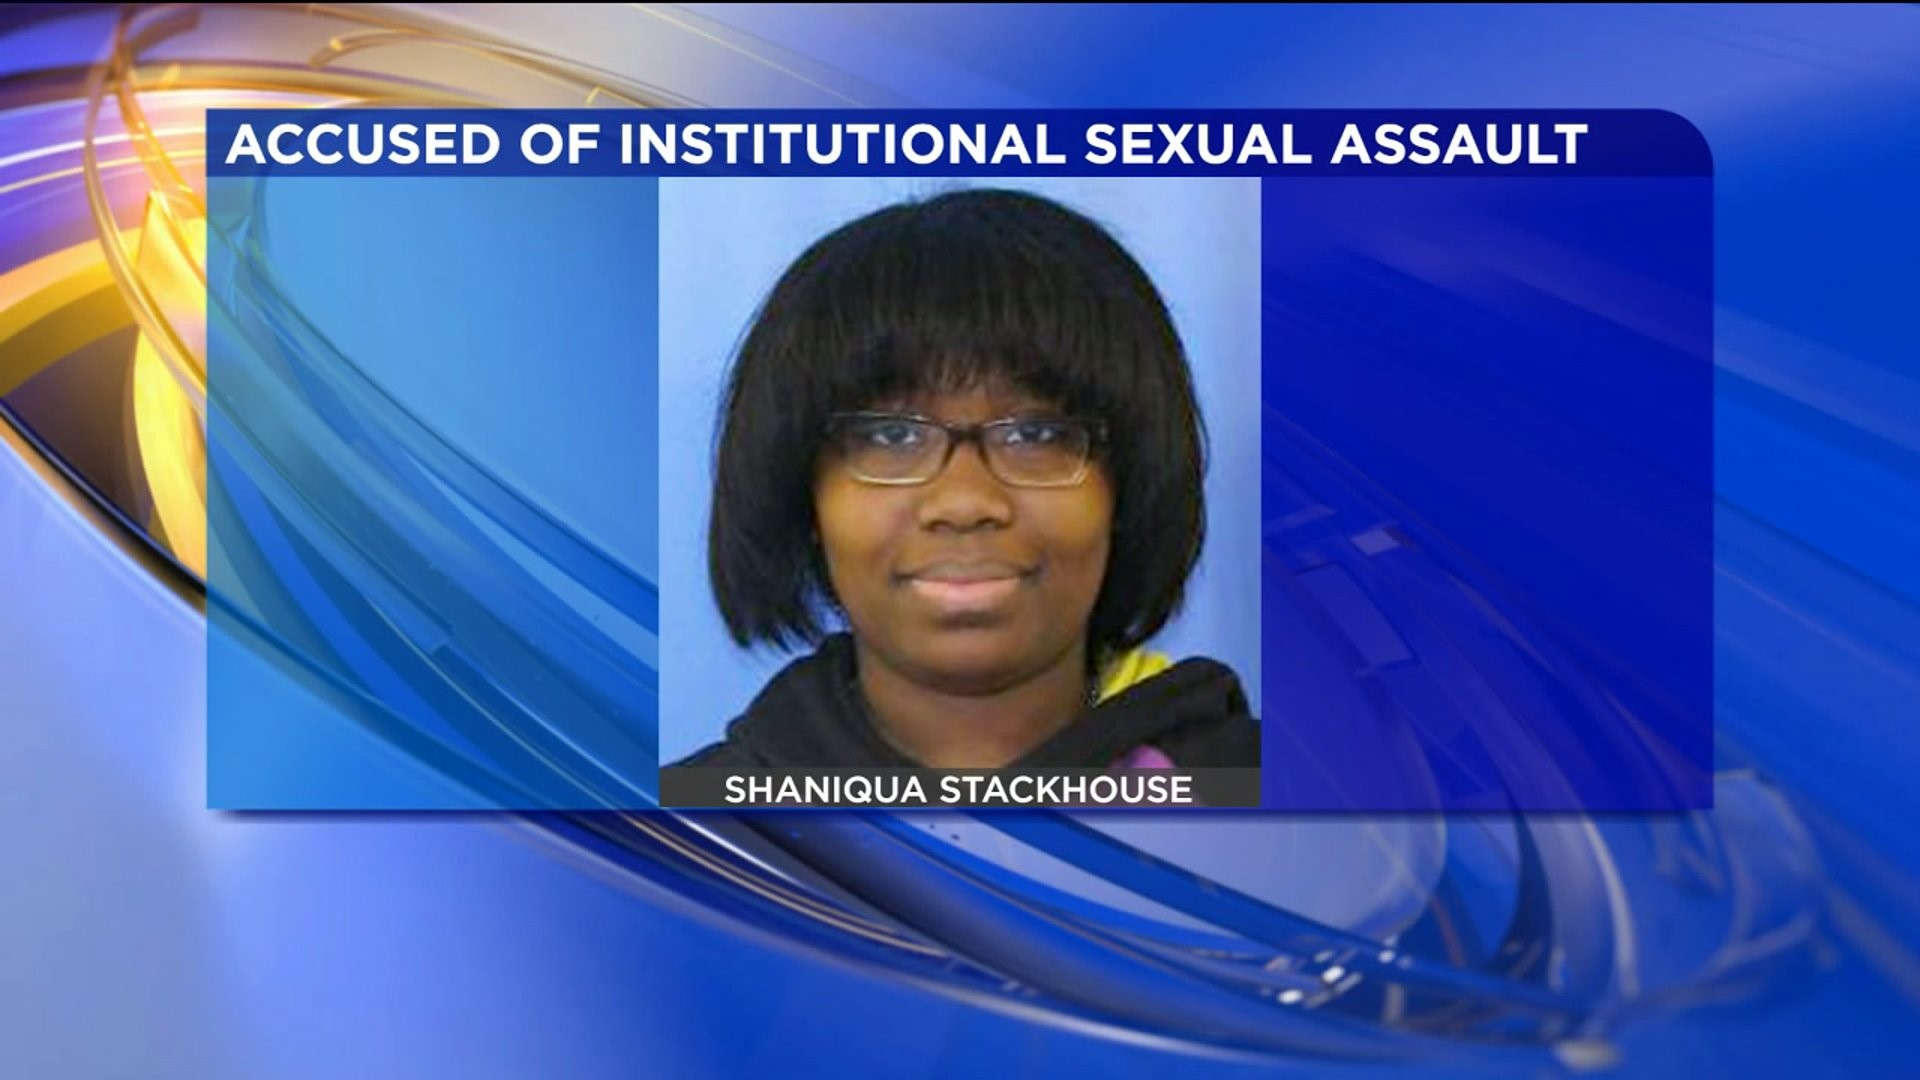 Counselor at Treatment Center Facing Sexual Assault Charges